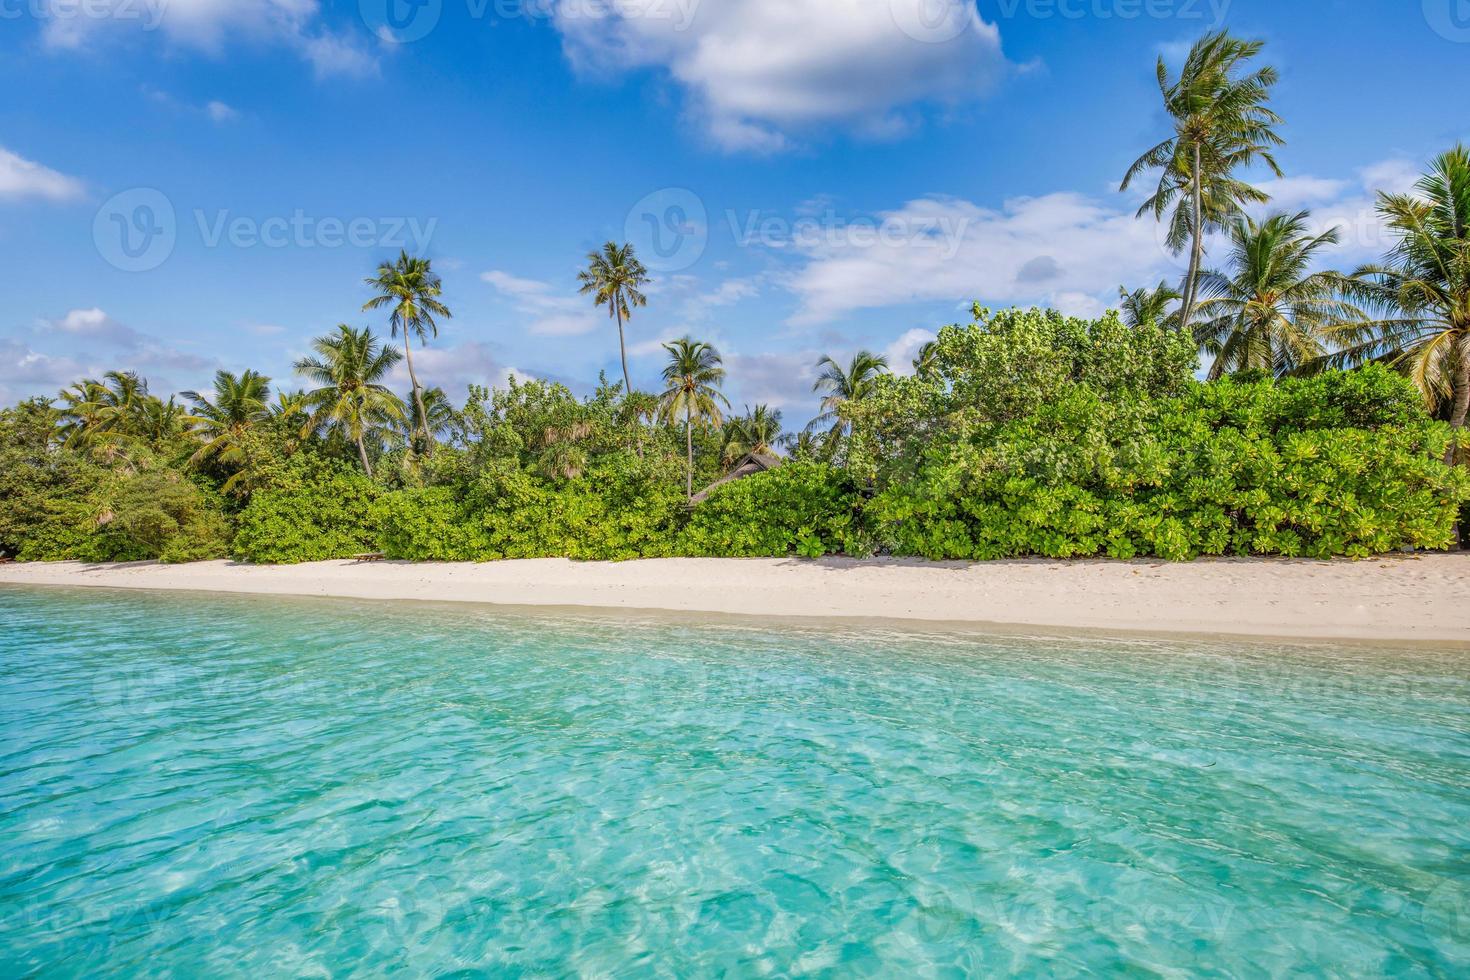 Maldives islands ocean tropical beach. Exotic sea lagoon, palm trees over white sand. Idyllic nature landscape. Amazing beach scenic shore, bright tropical summer sun and blue sky with light clouds photo